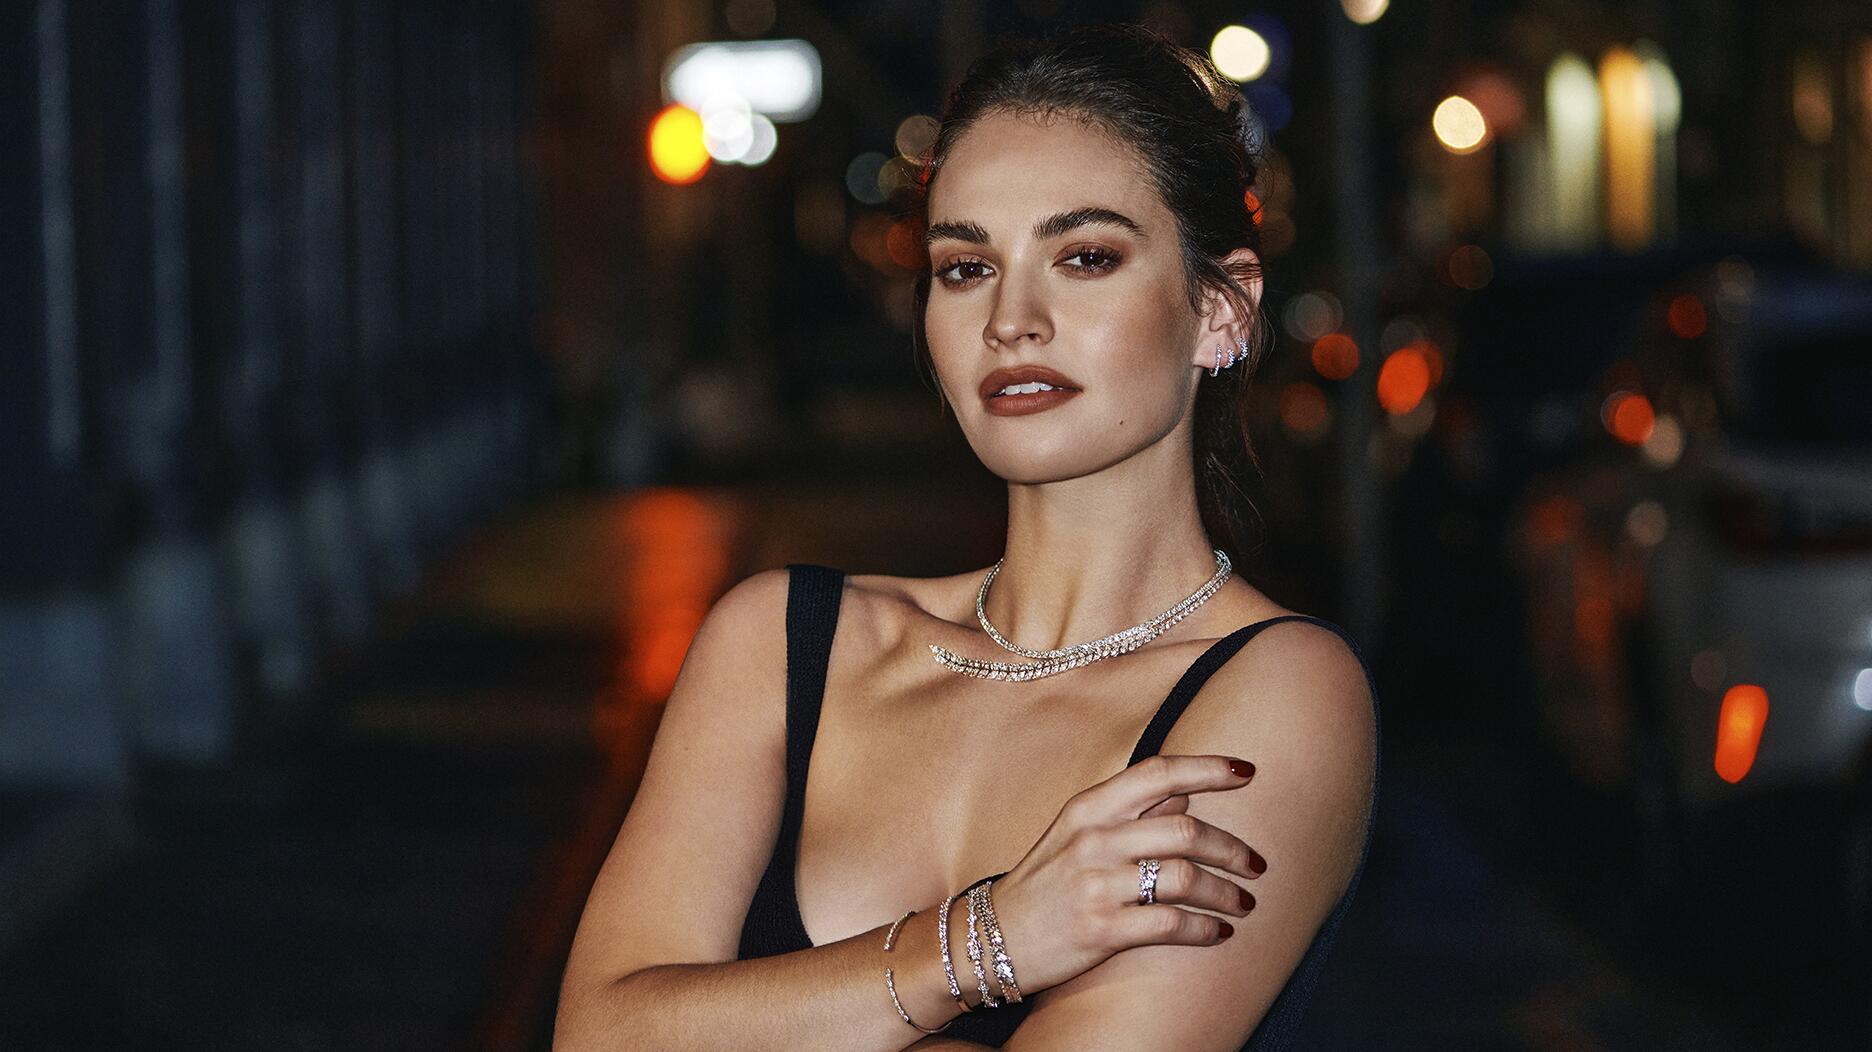 Natural Diamond Council's Latest Campaign With Lily James Is Here